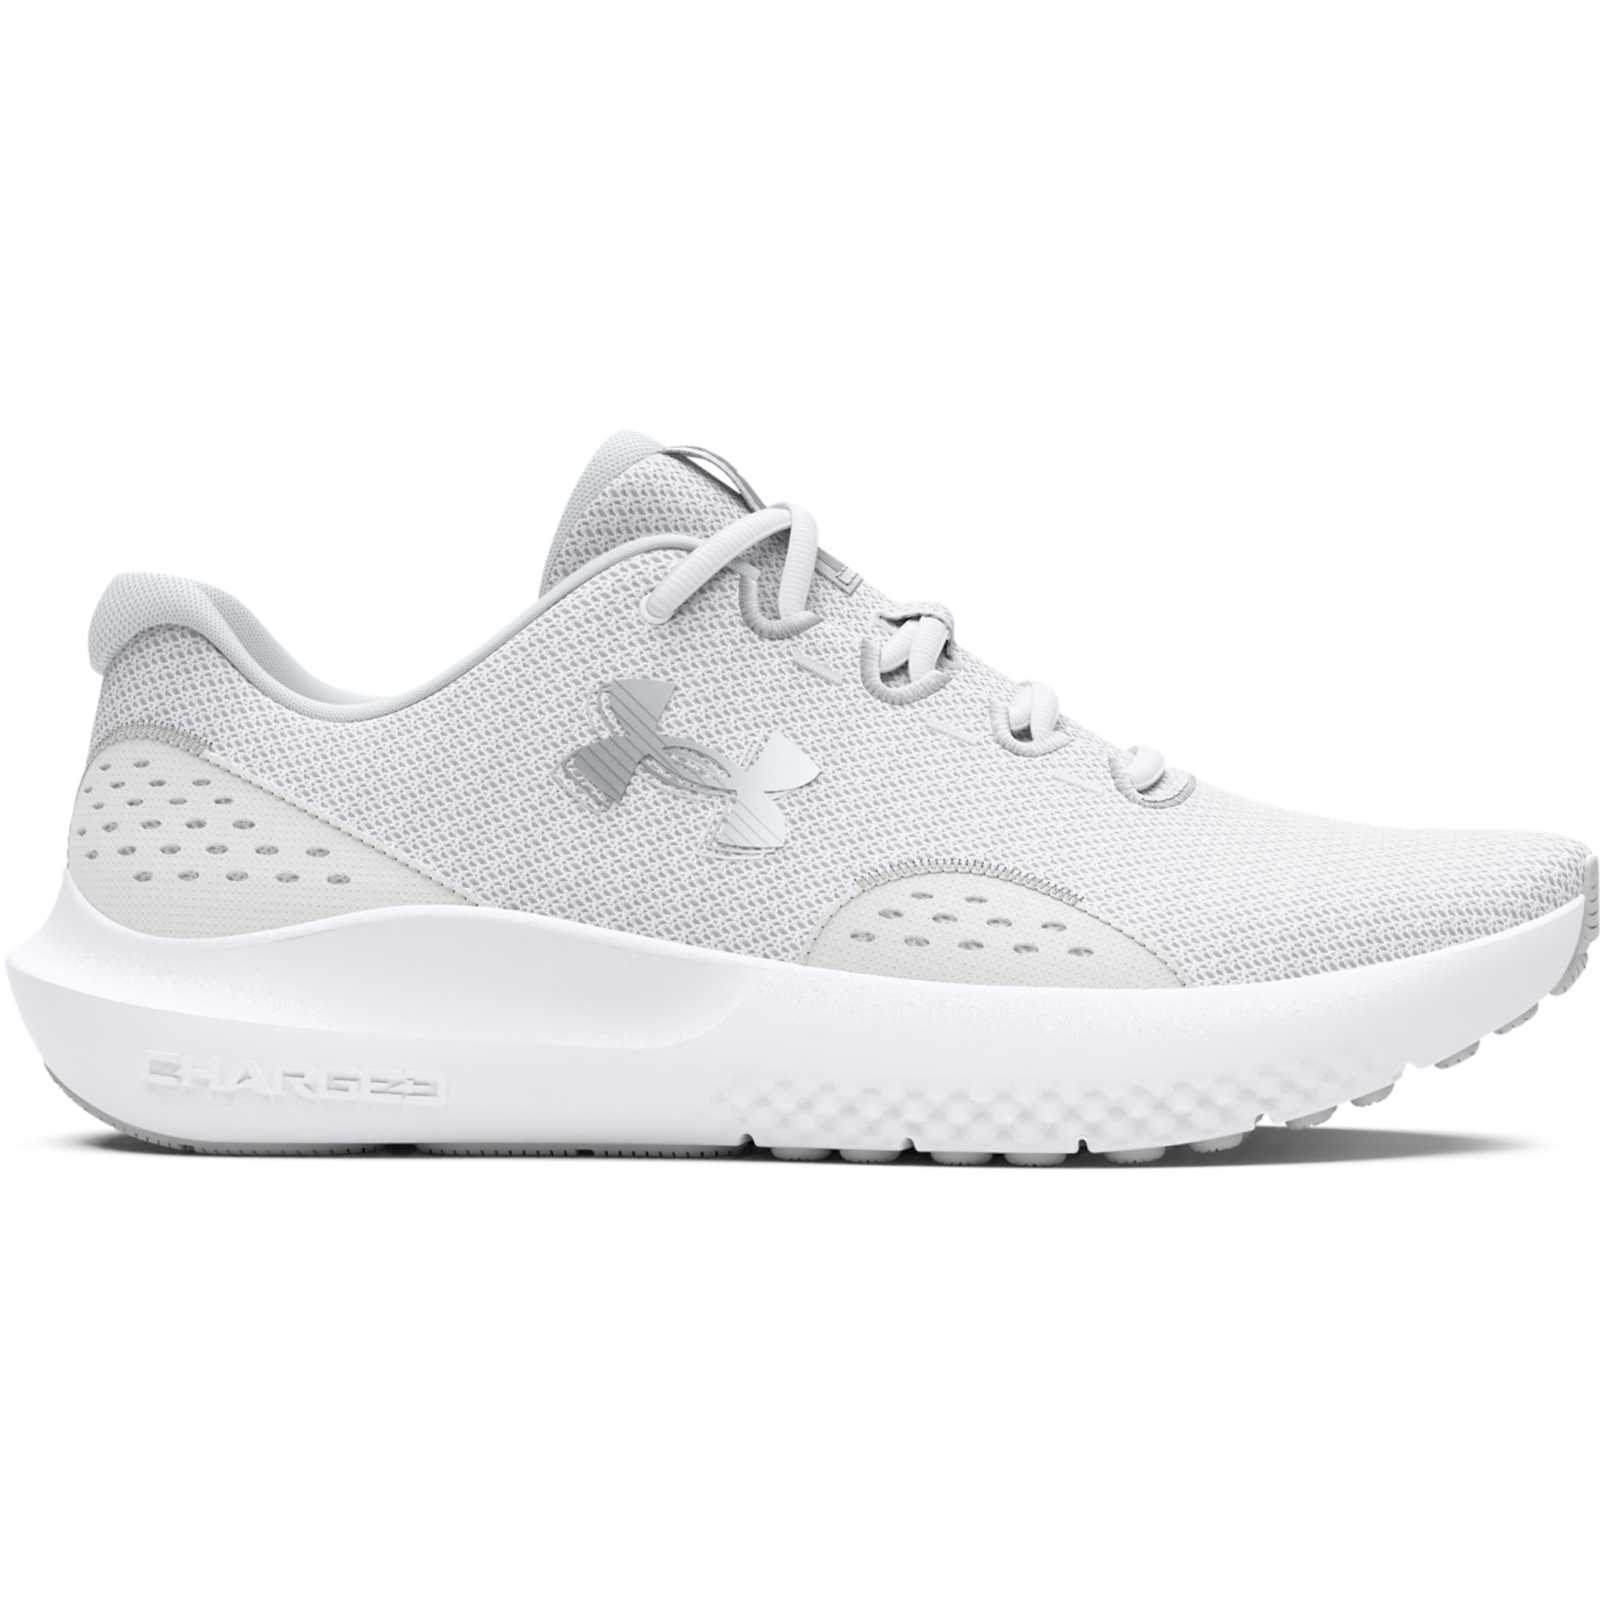 Under Armour - 3027007 UA W CHARGED SURGE 4 - White/Distant Gray/Metallic Silver Γυναικεία > Παπούτσια > Αθλητικά > Παπούτσι Low Cut